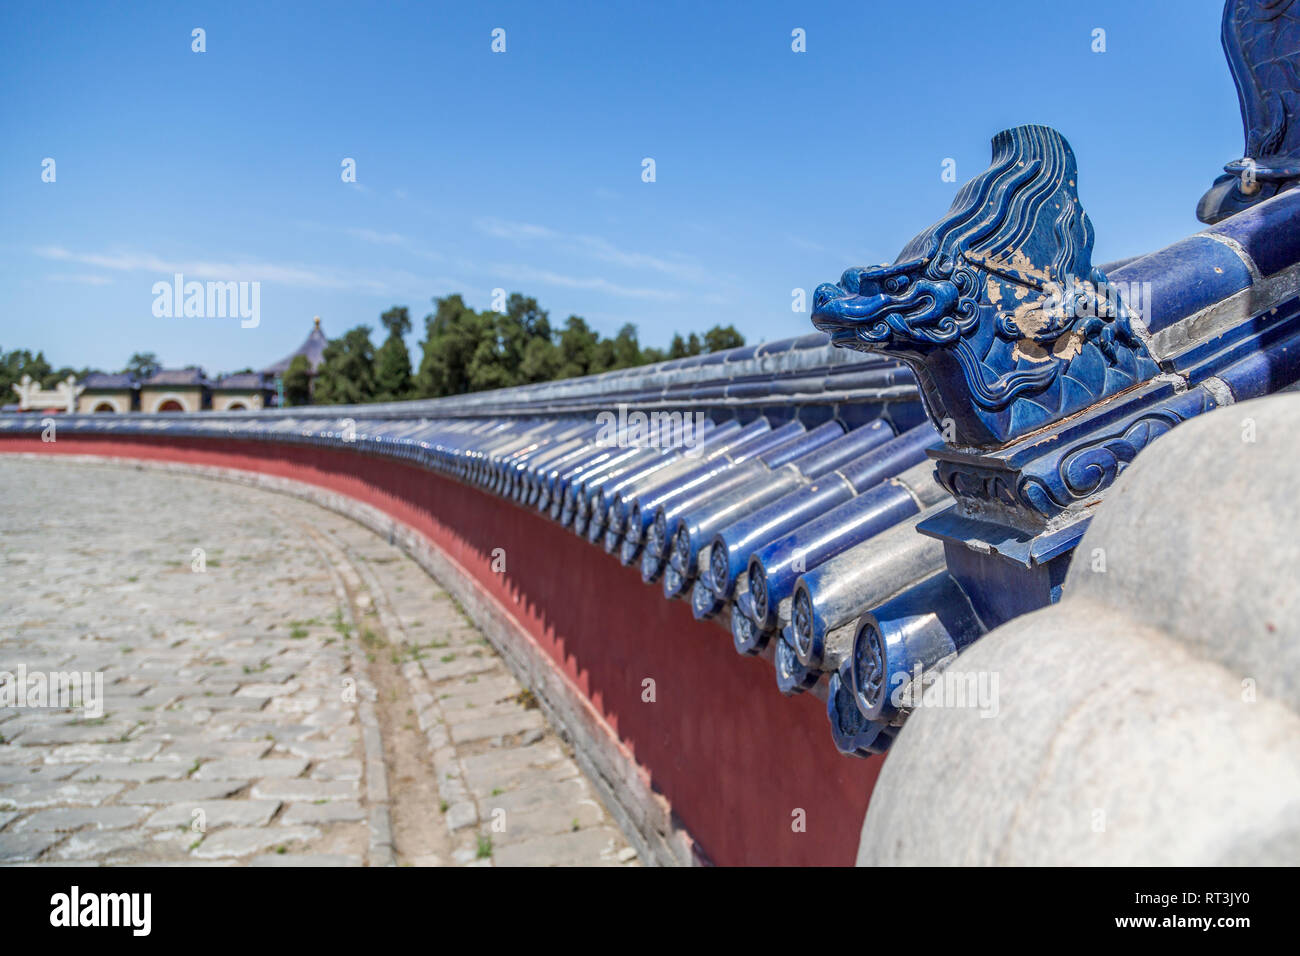 A blue glazed dragons head adorns a red circular wall topped with blue glaze tiles. This is one of the surrounding walls of The Circular Mound Altar. Stock Photo